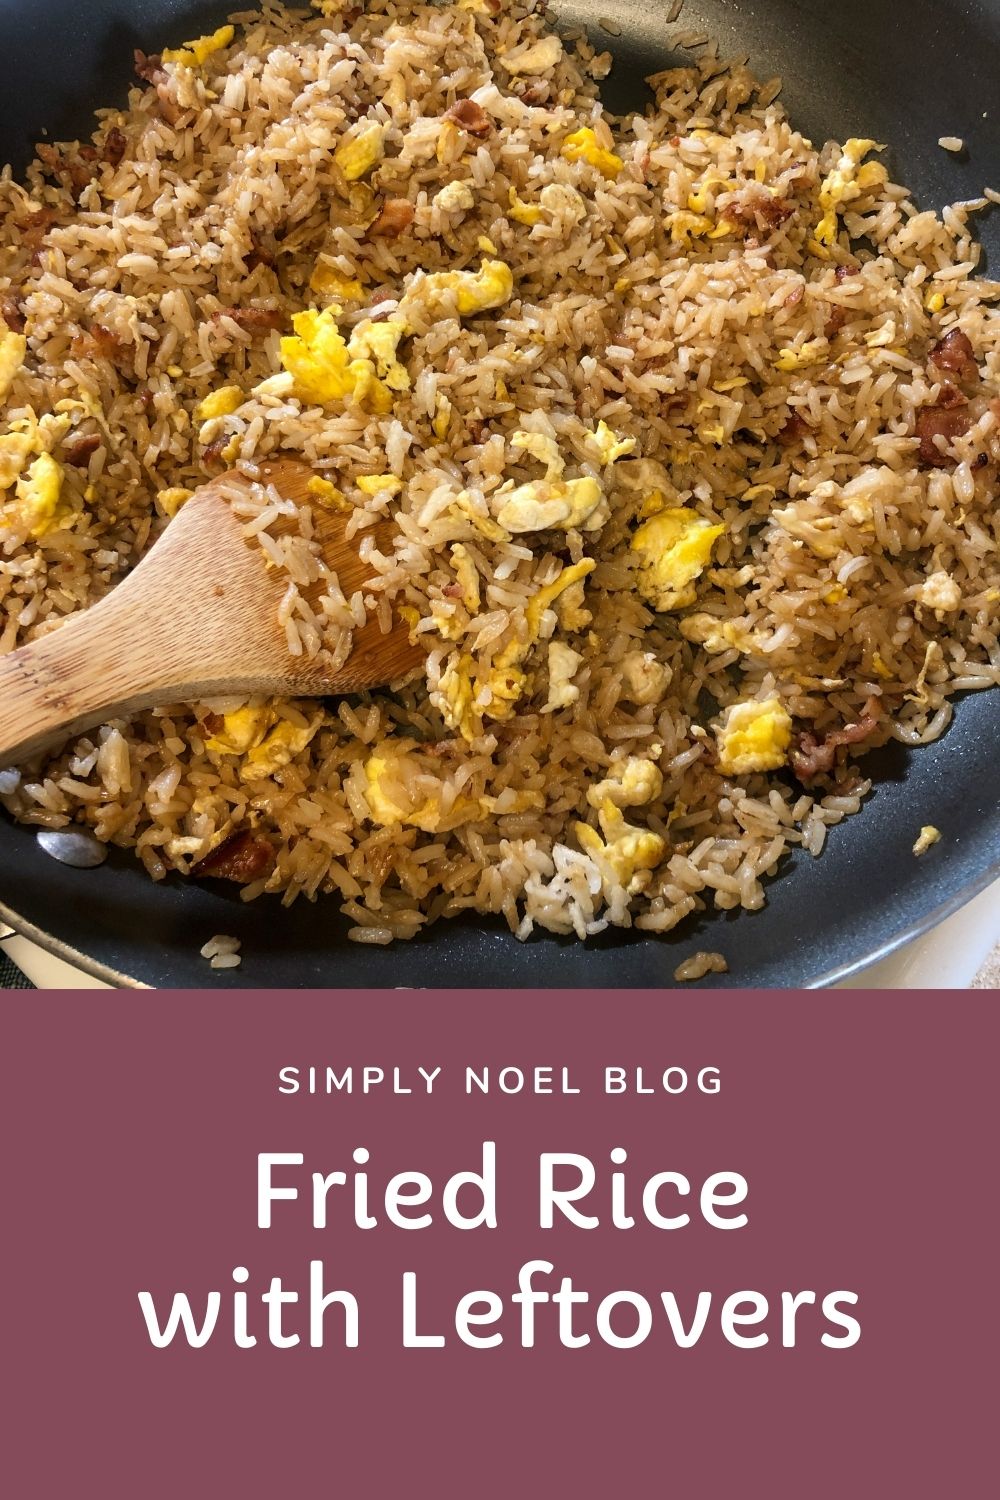 Fried rice with leftovers